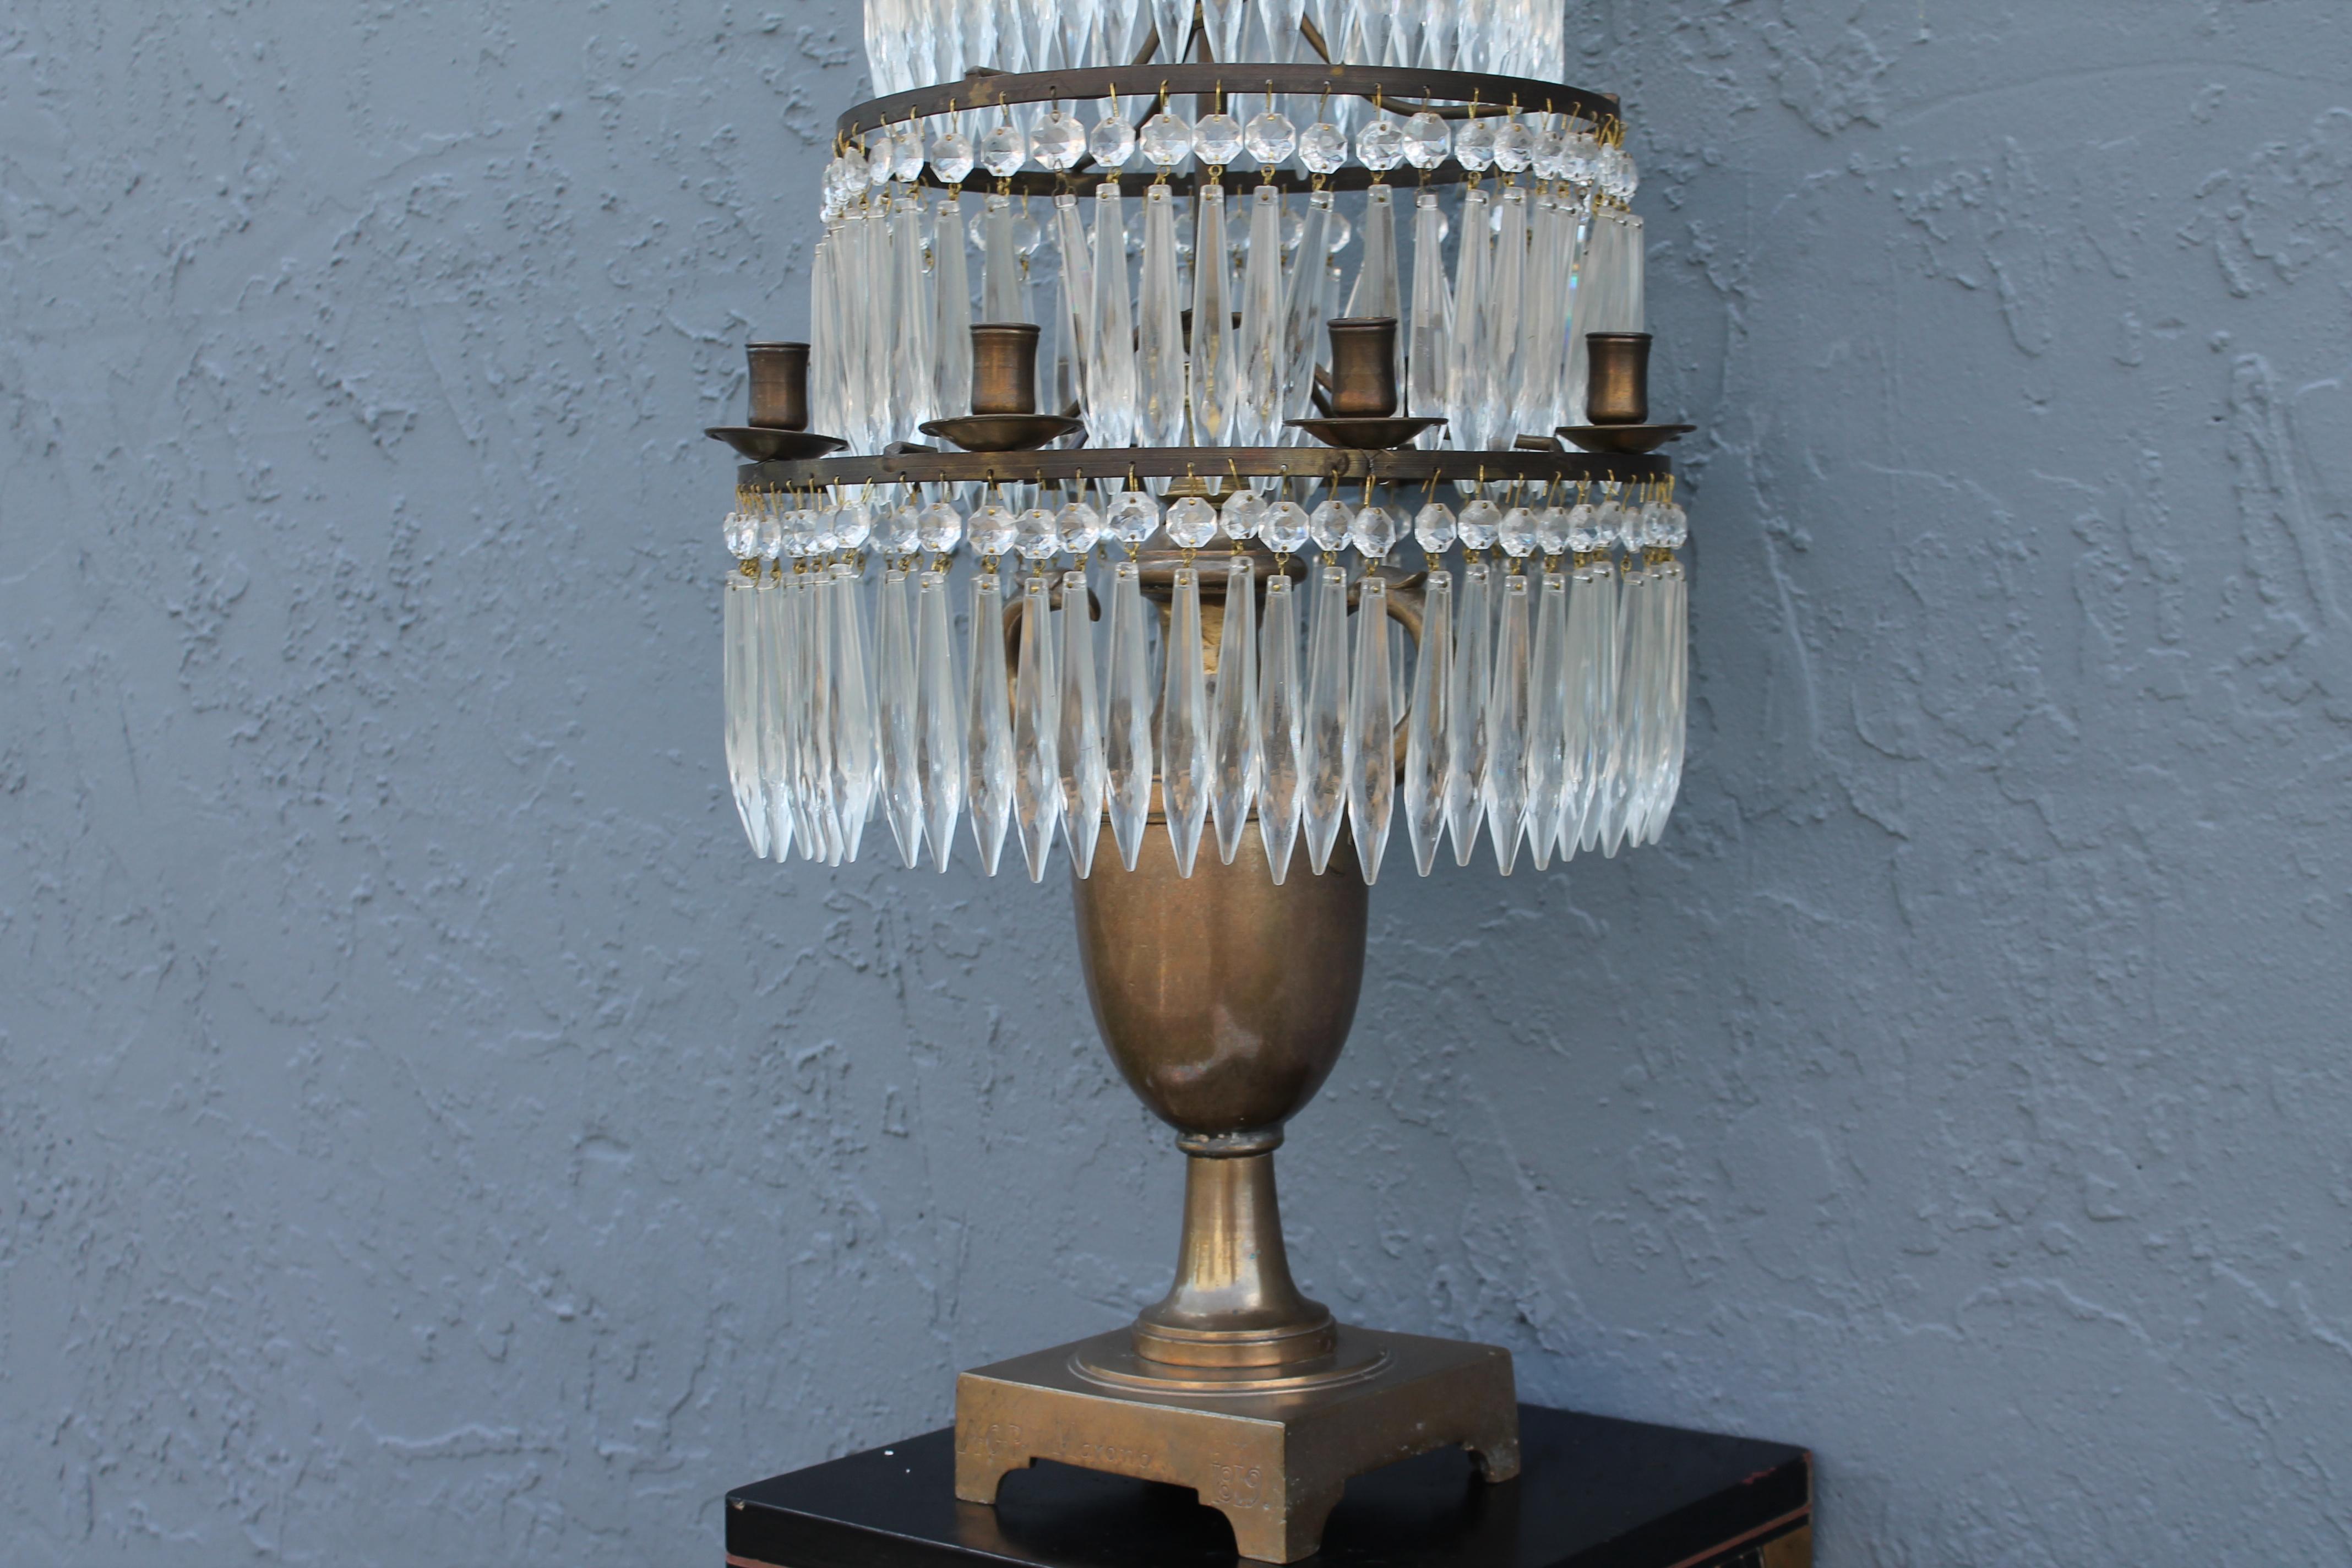 c1819 Neoclassical Cut Crystal and Bronze 6 tier Candle Floor Lamp Torchiere For Sale 1